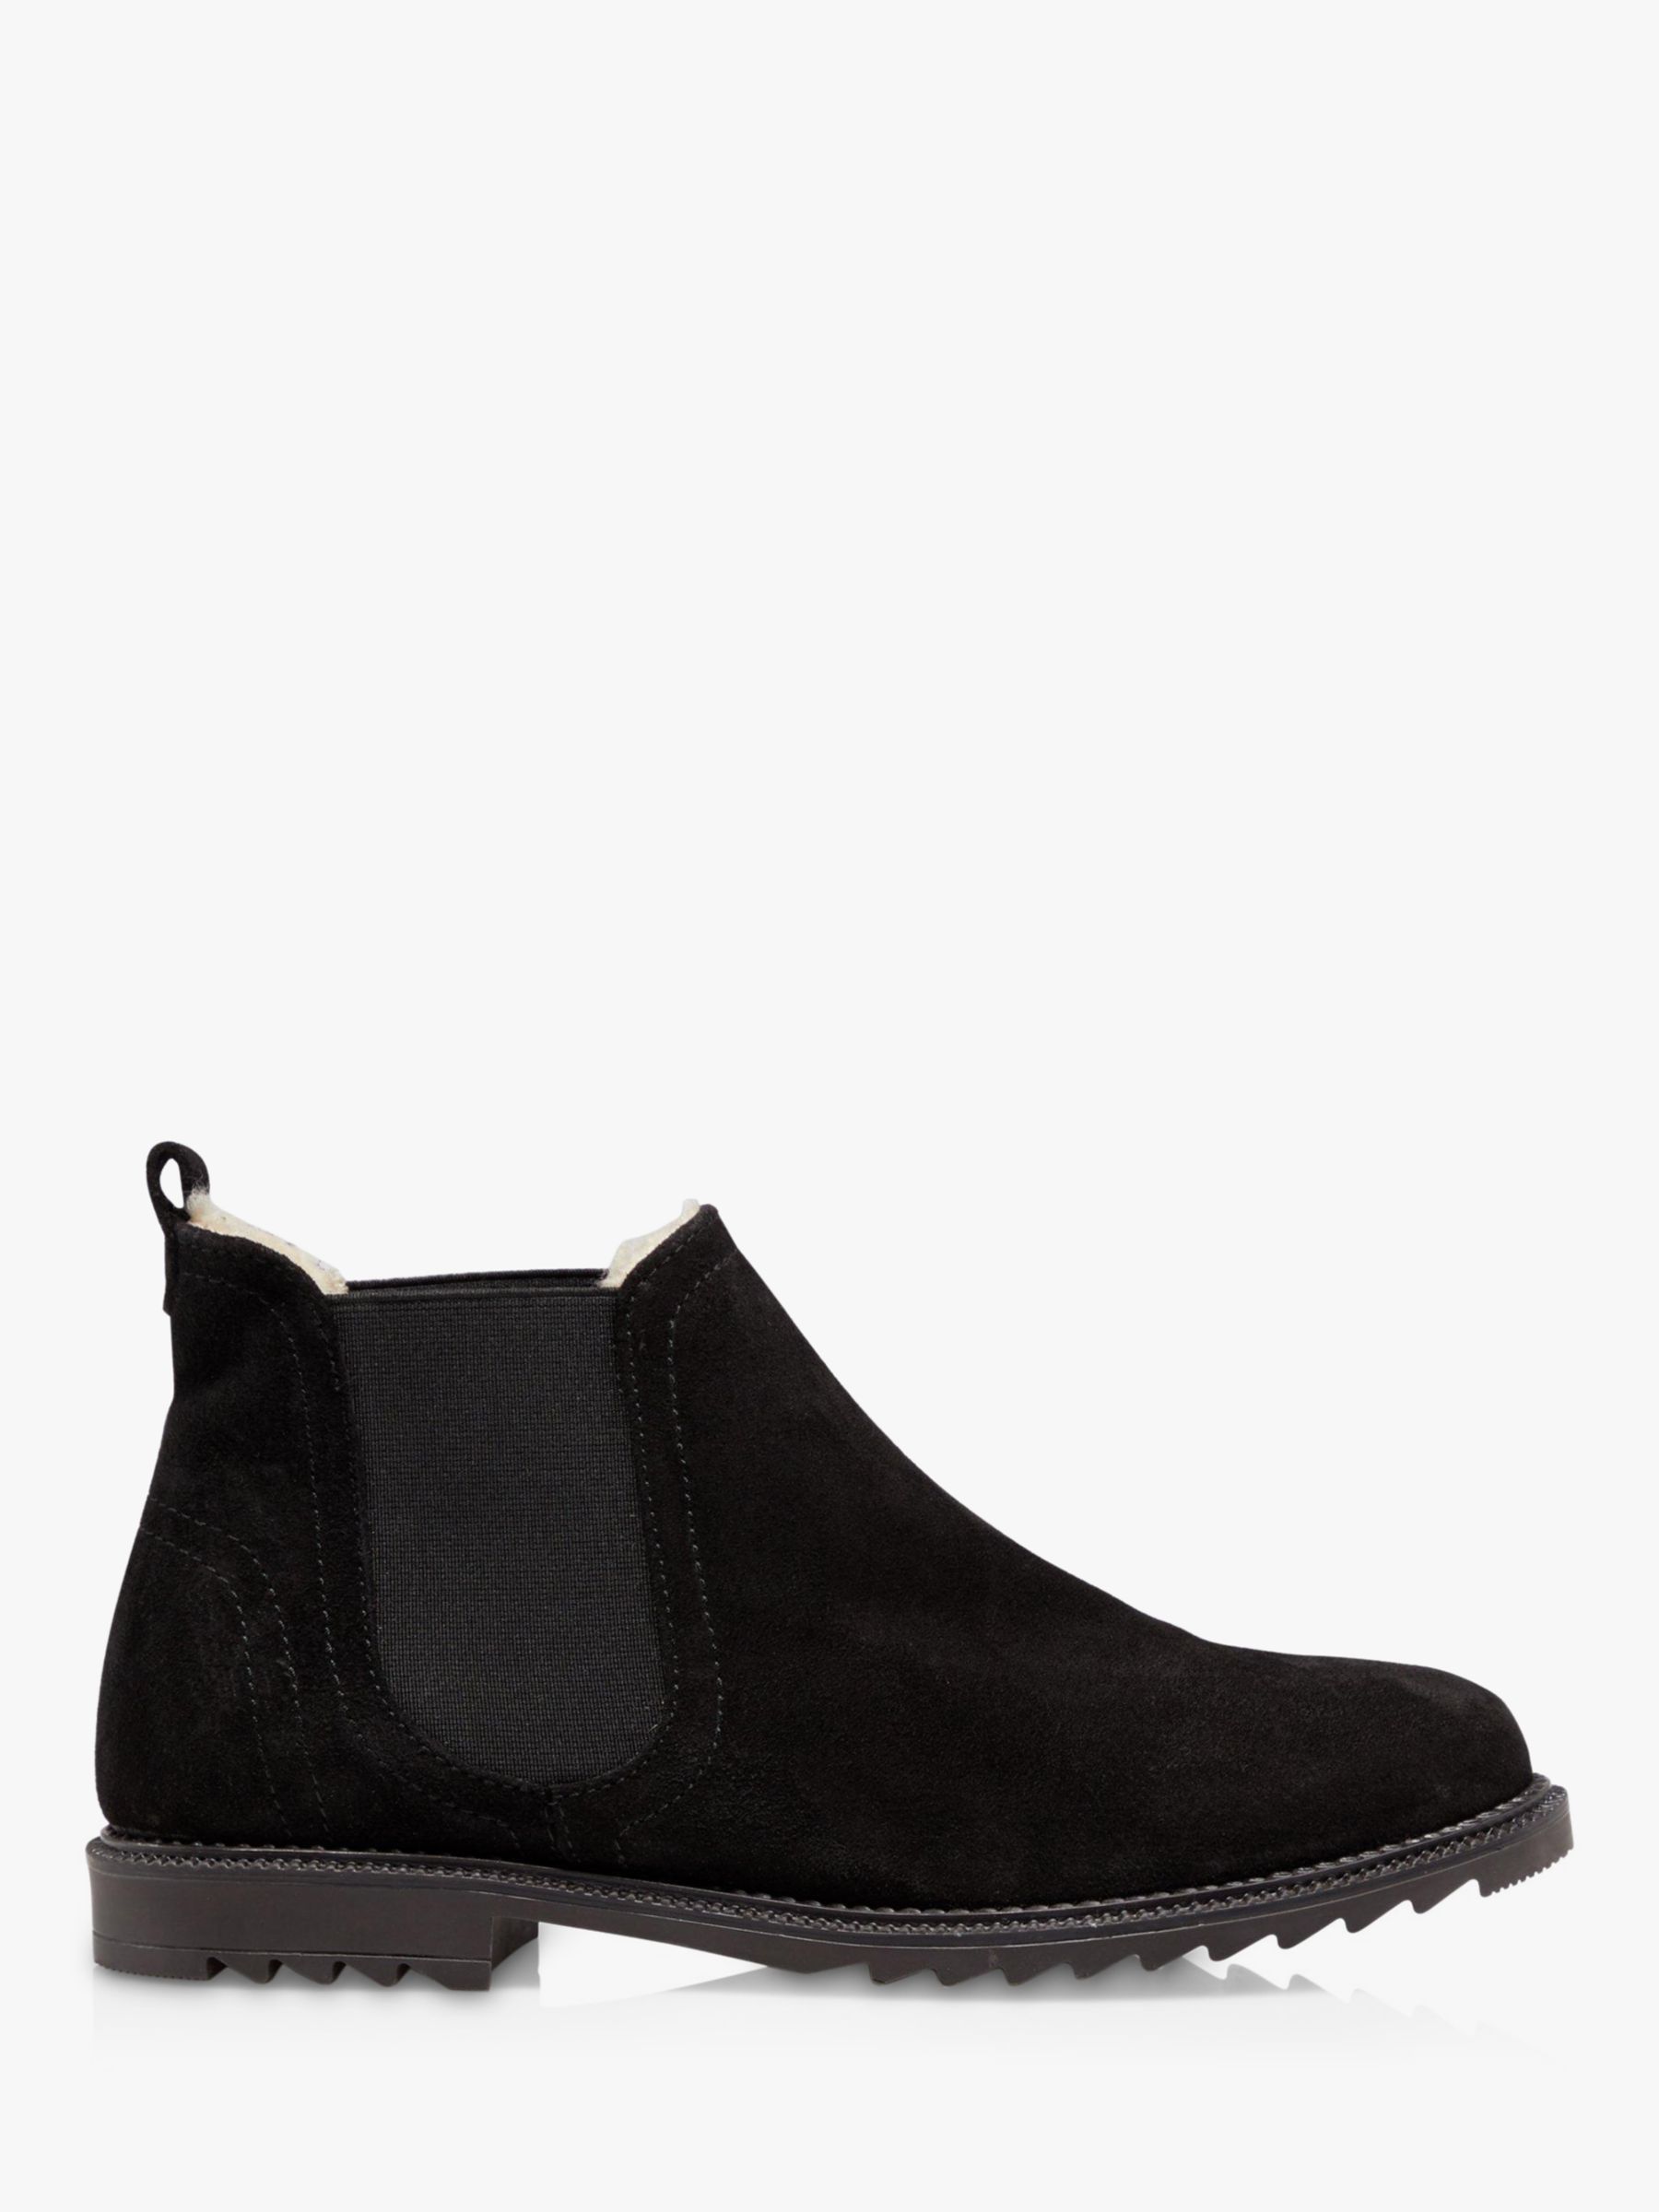 Dune Pedal Suede Faux Shearling Lined Chelsea Boots, Black at John ...